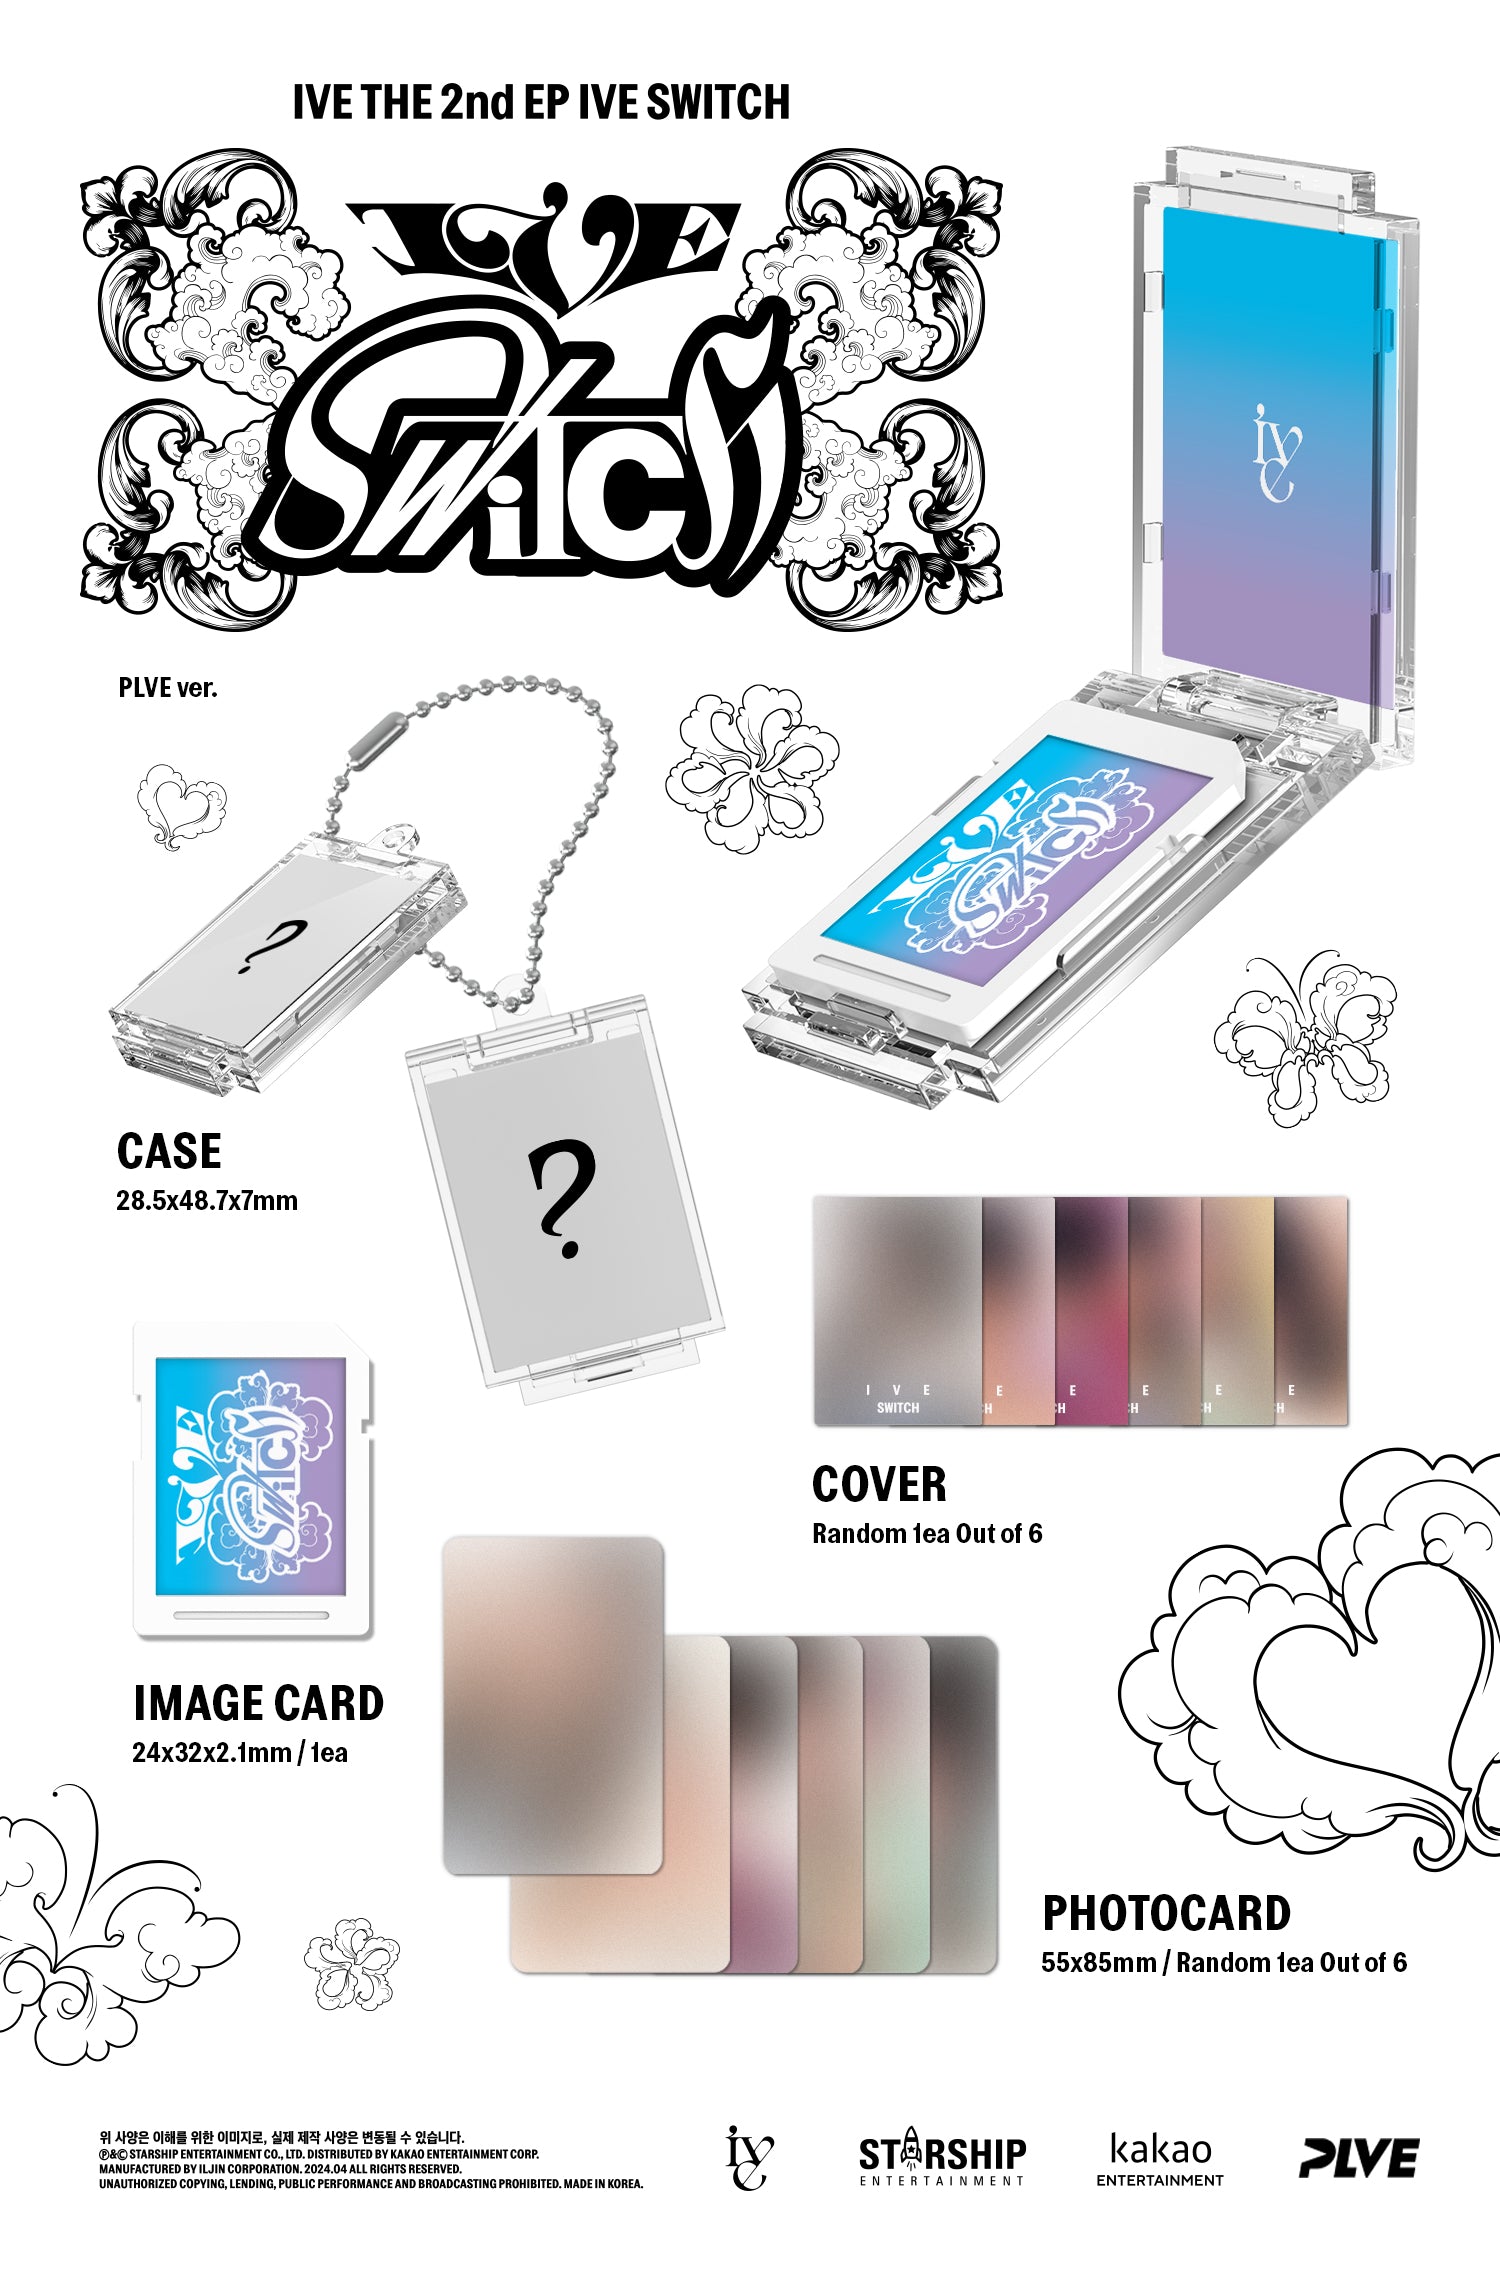 IVE 2ND EP ALBUM 'IVE SWITCH' (PLVE) DETAIL